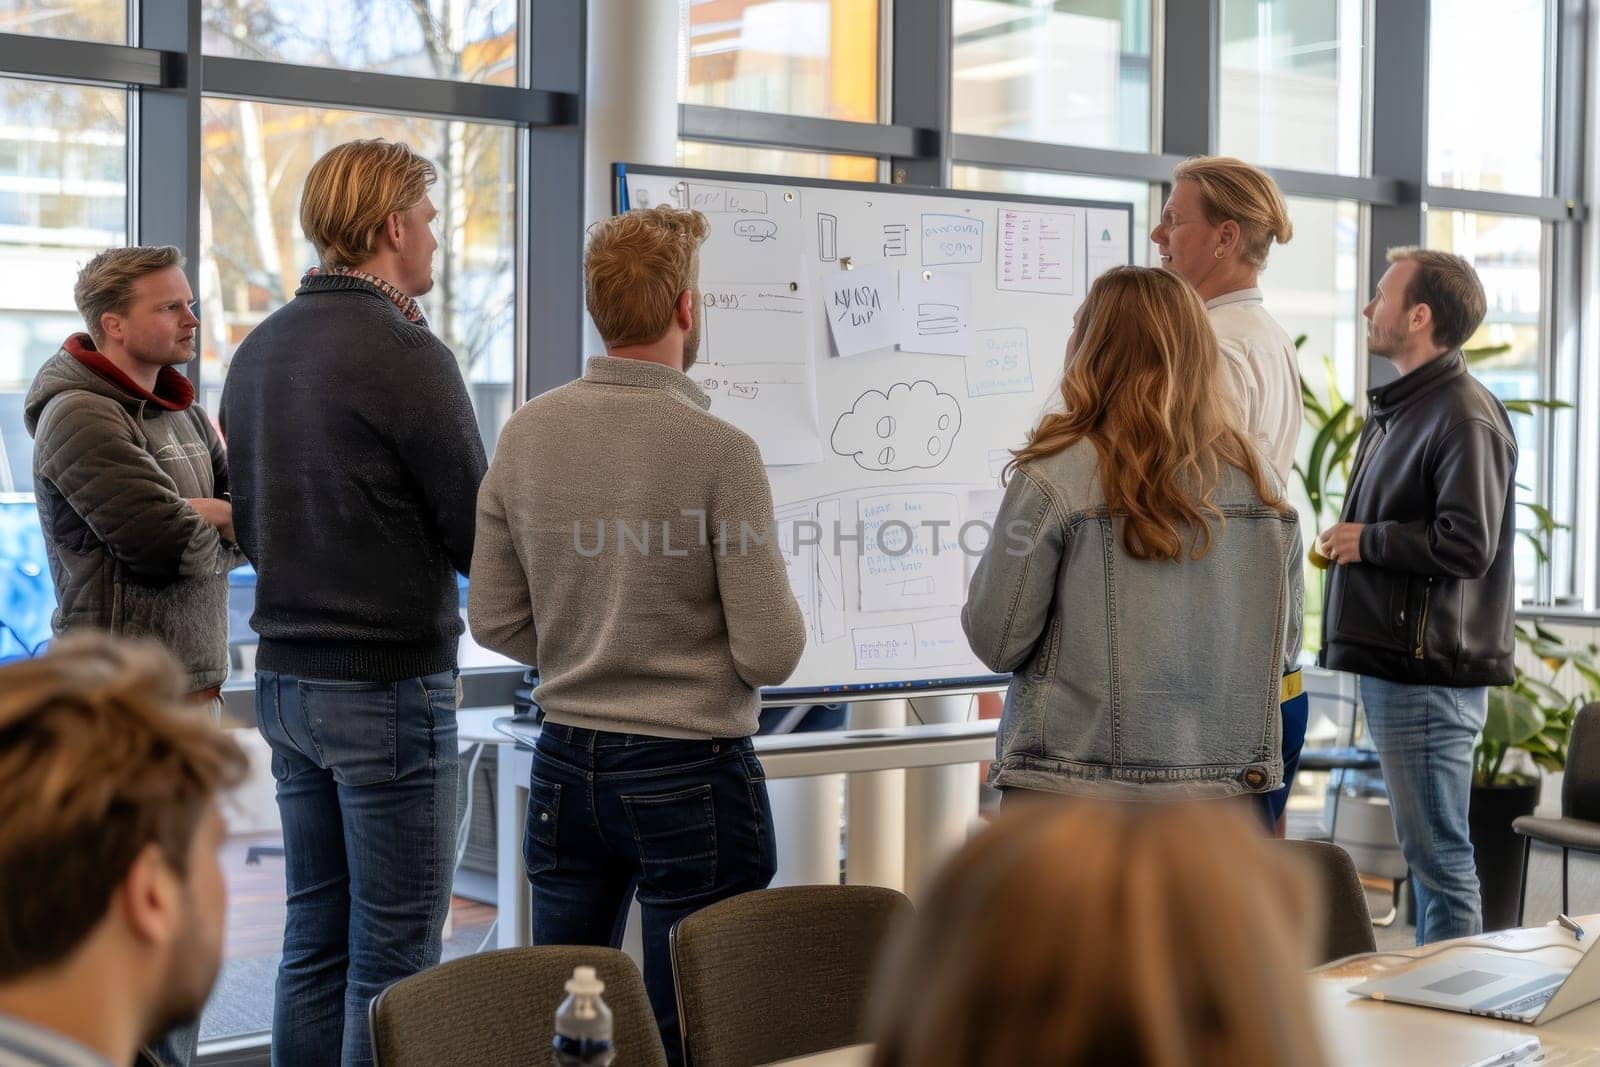 A group of people are standing around a white board with drawings on it. They are discussing ideas and collaborating on a project. Scene is focused and productive